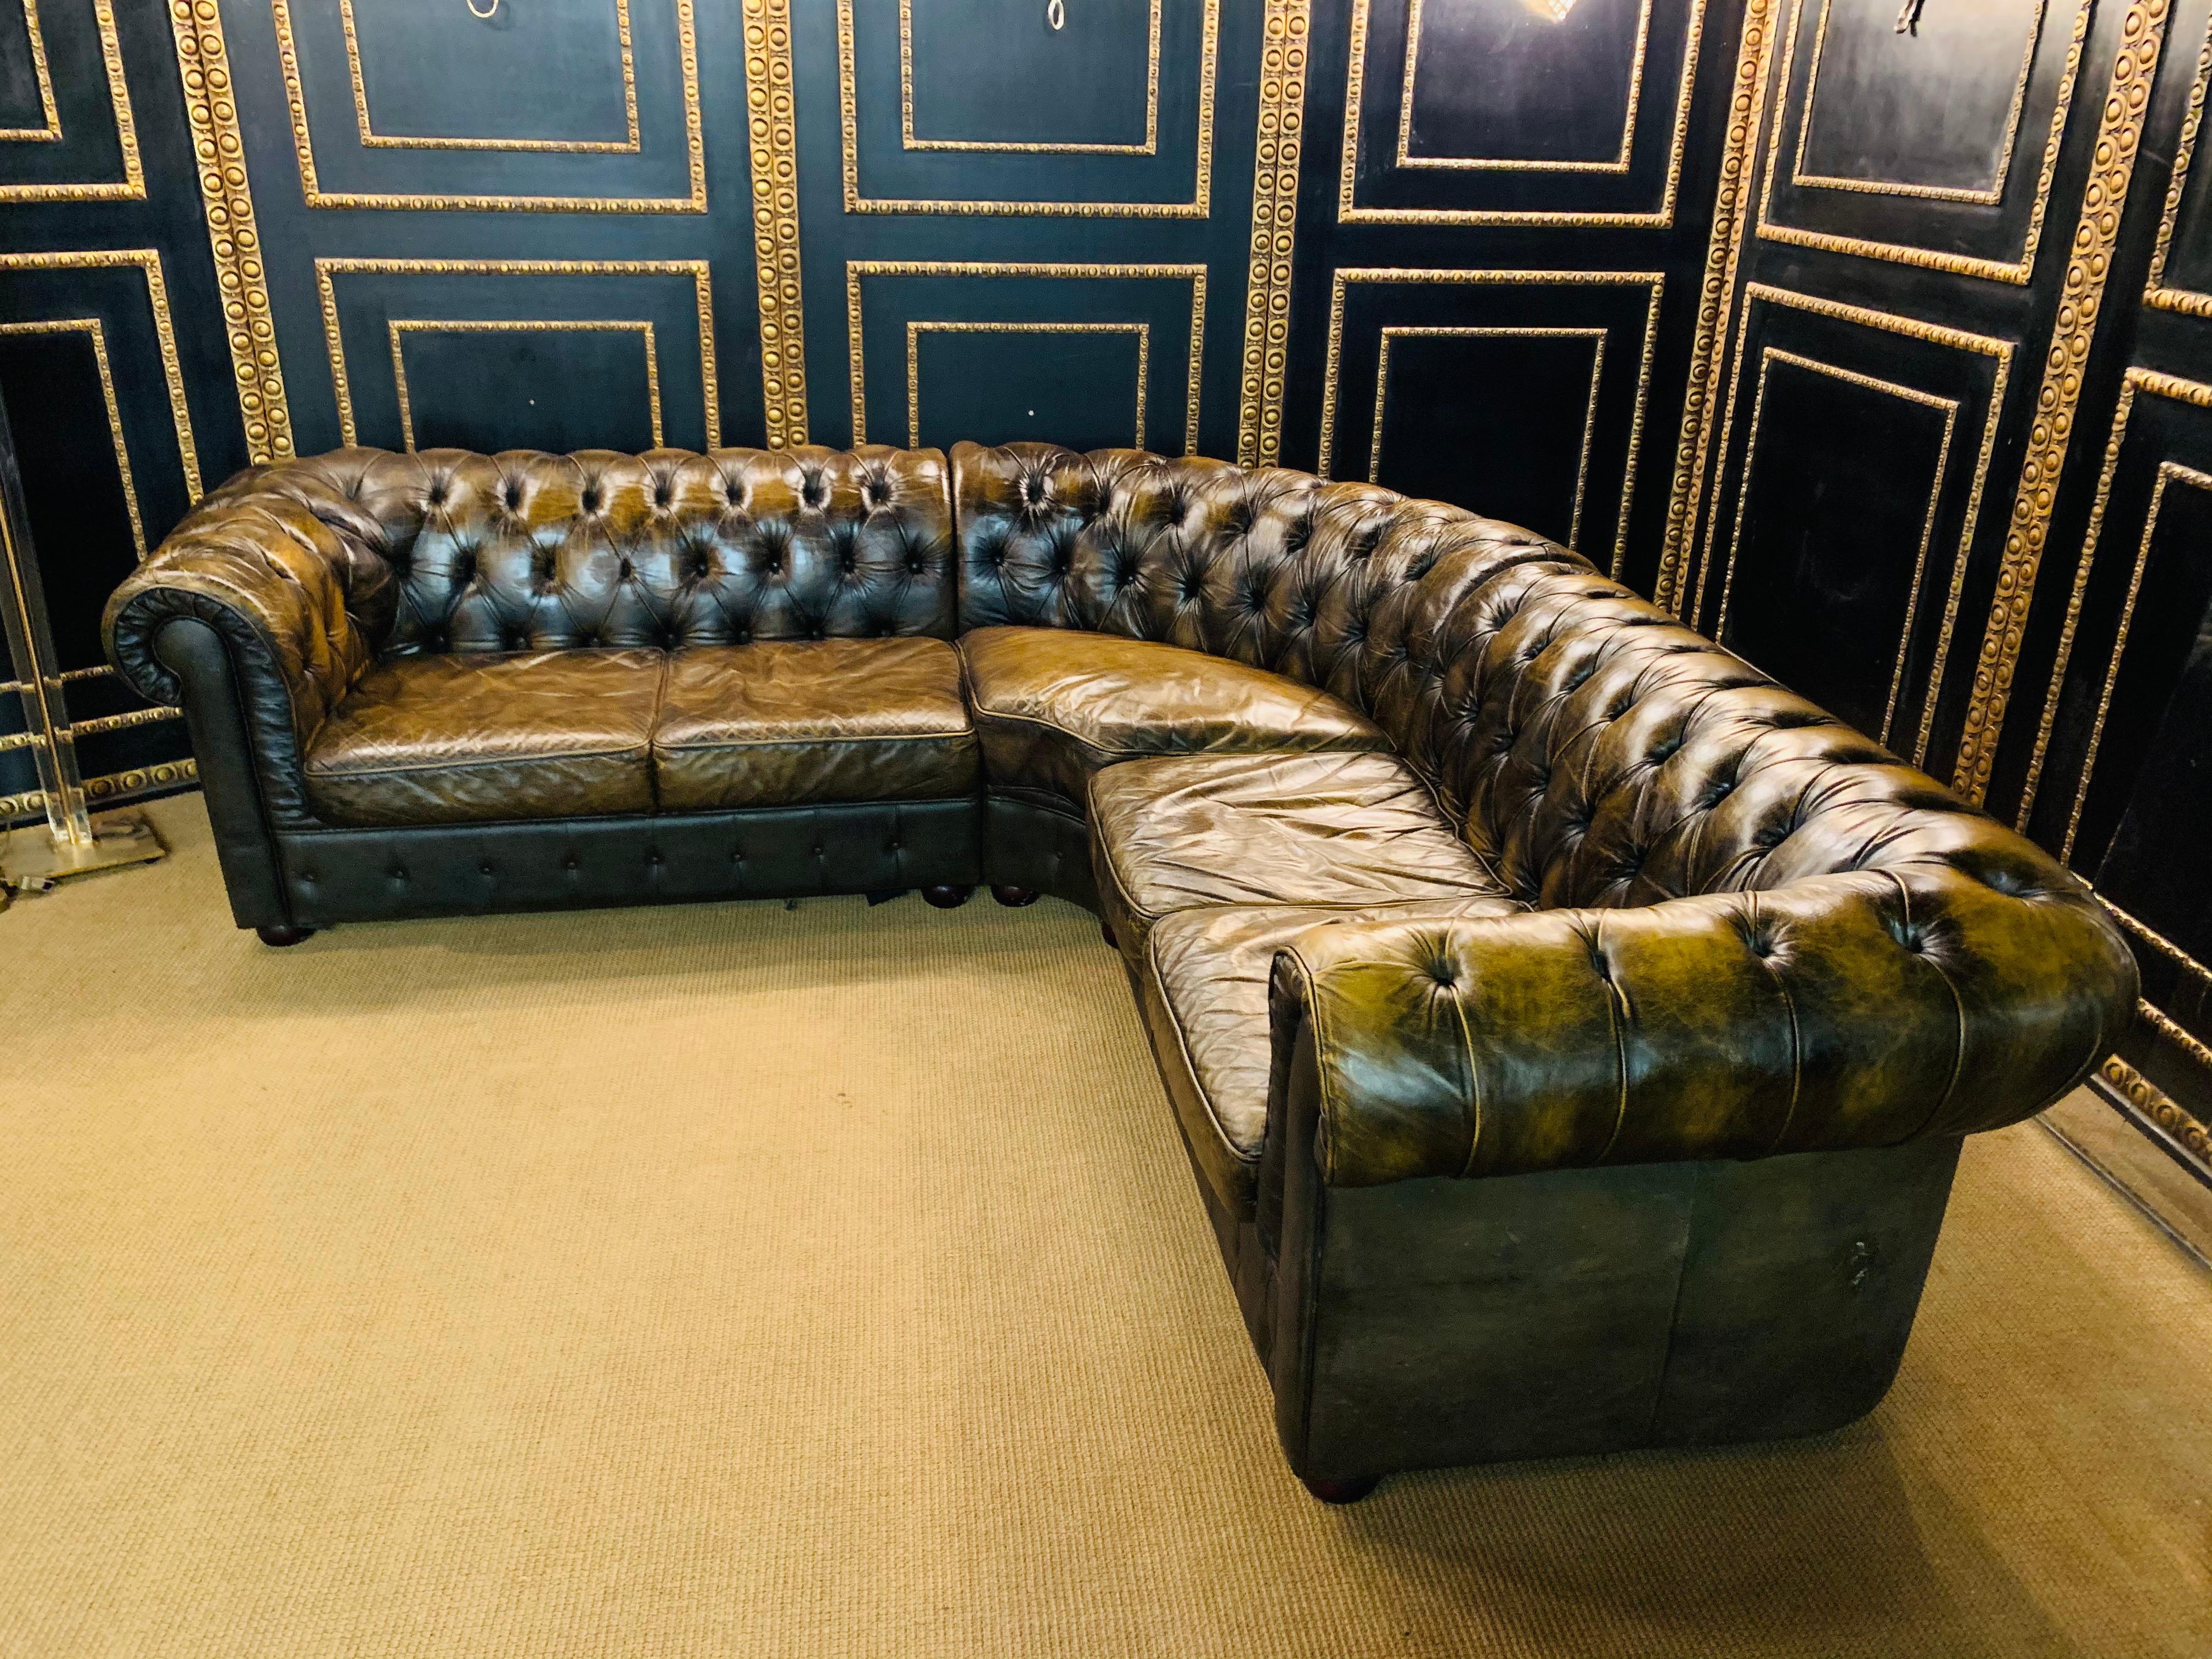 Rare Chesterfield corner couch made of real thick leather.
good condition and with a beautiful dark green patina.

Measurements:
250cm x 250cm
Height 72cm
Seat height 40cm.